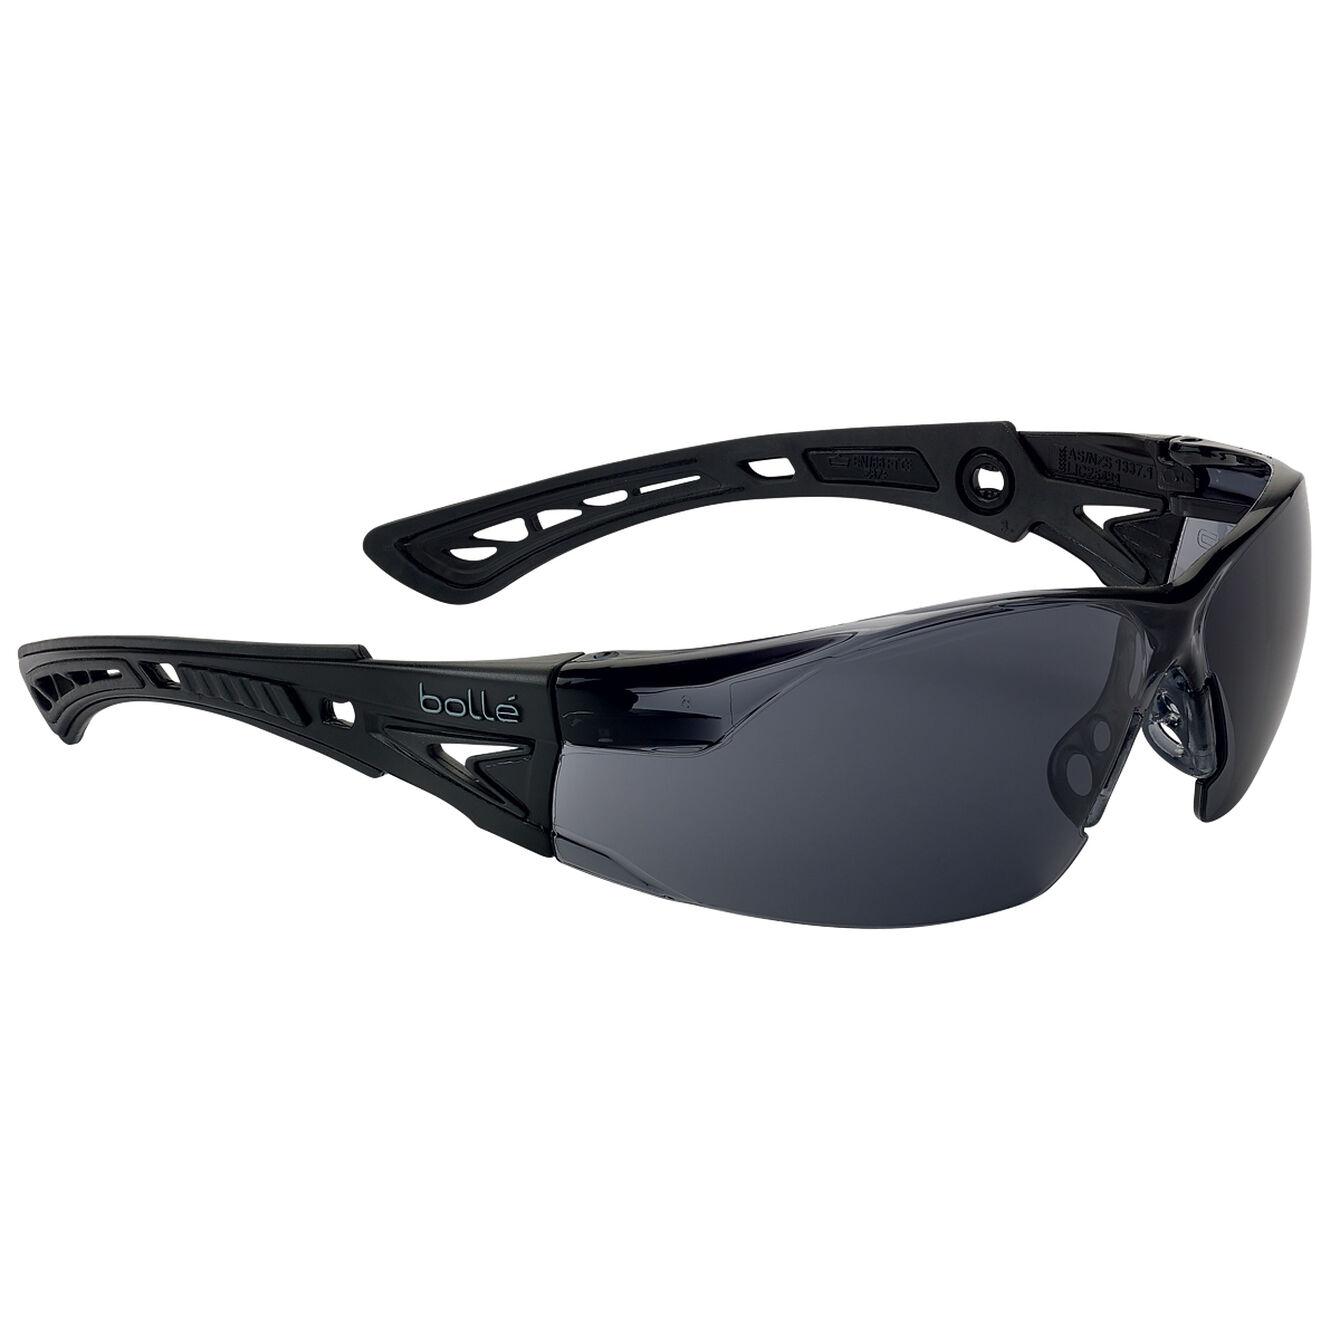 Bollé Safety RUSH+ Small BSSI safety glasses